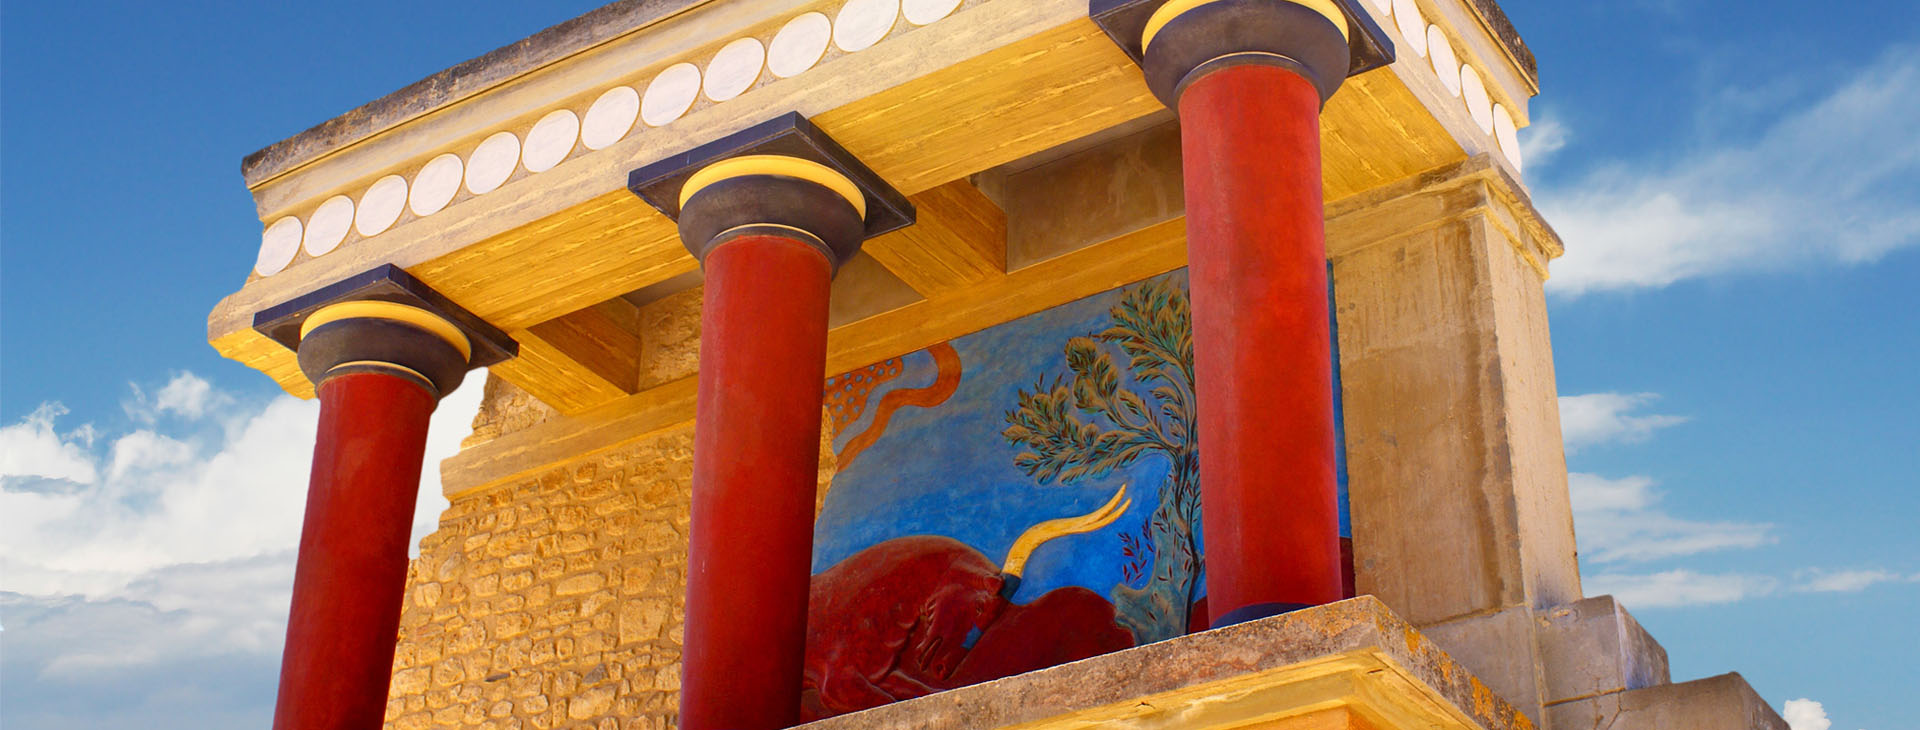 The Minoan palace at the archaeological site of Knossos, Heraklion